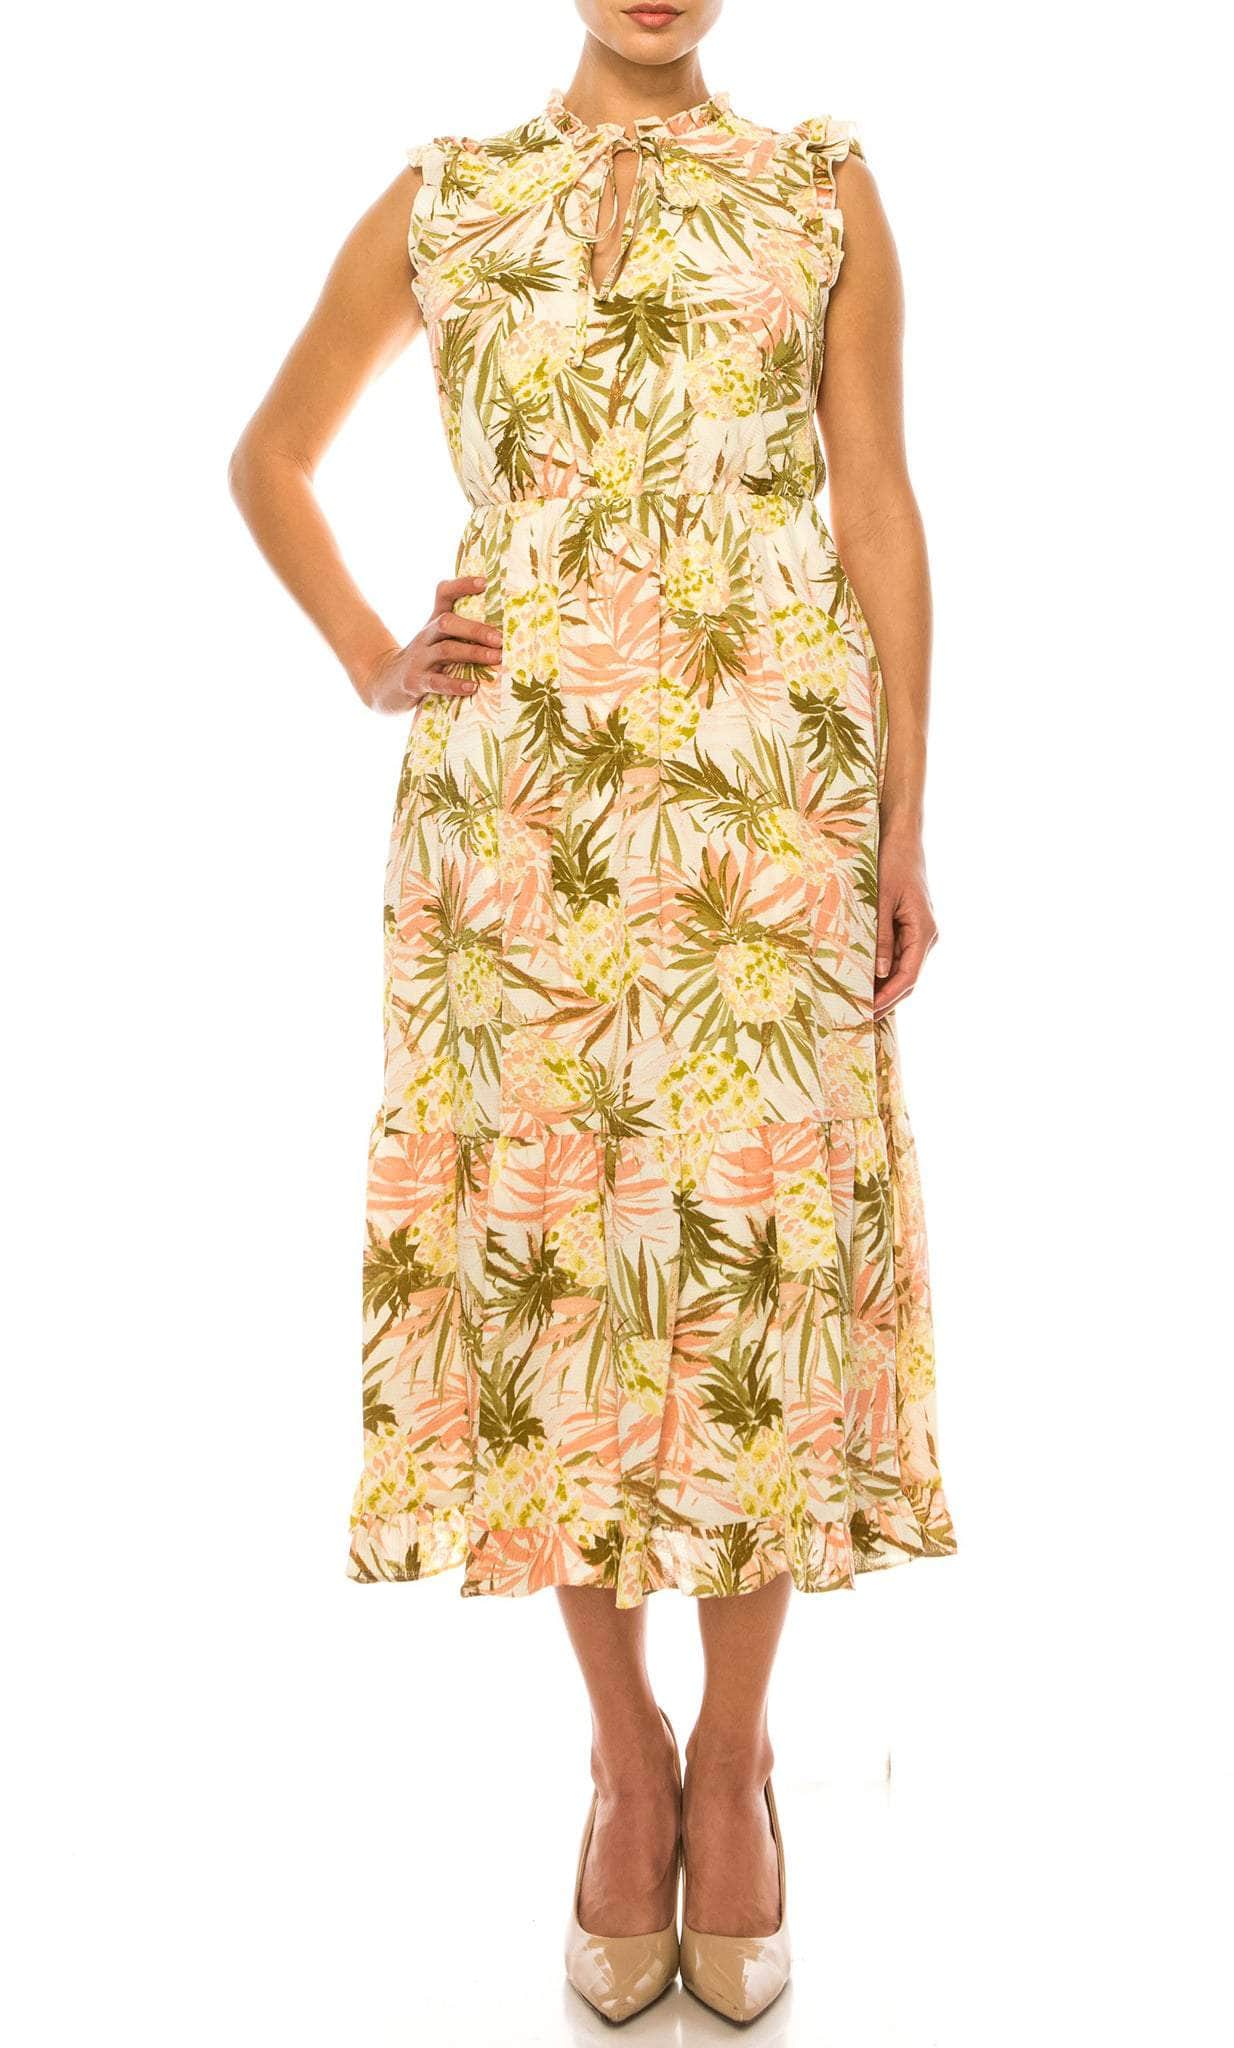 Laundry HV03D25 - Printed Summer Midi Dress Special Occasion Dress 0 / Anana Tropical